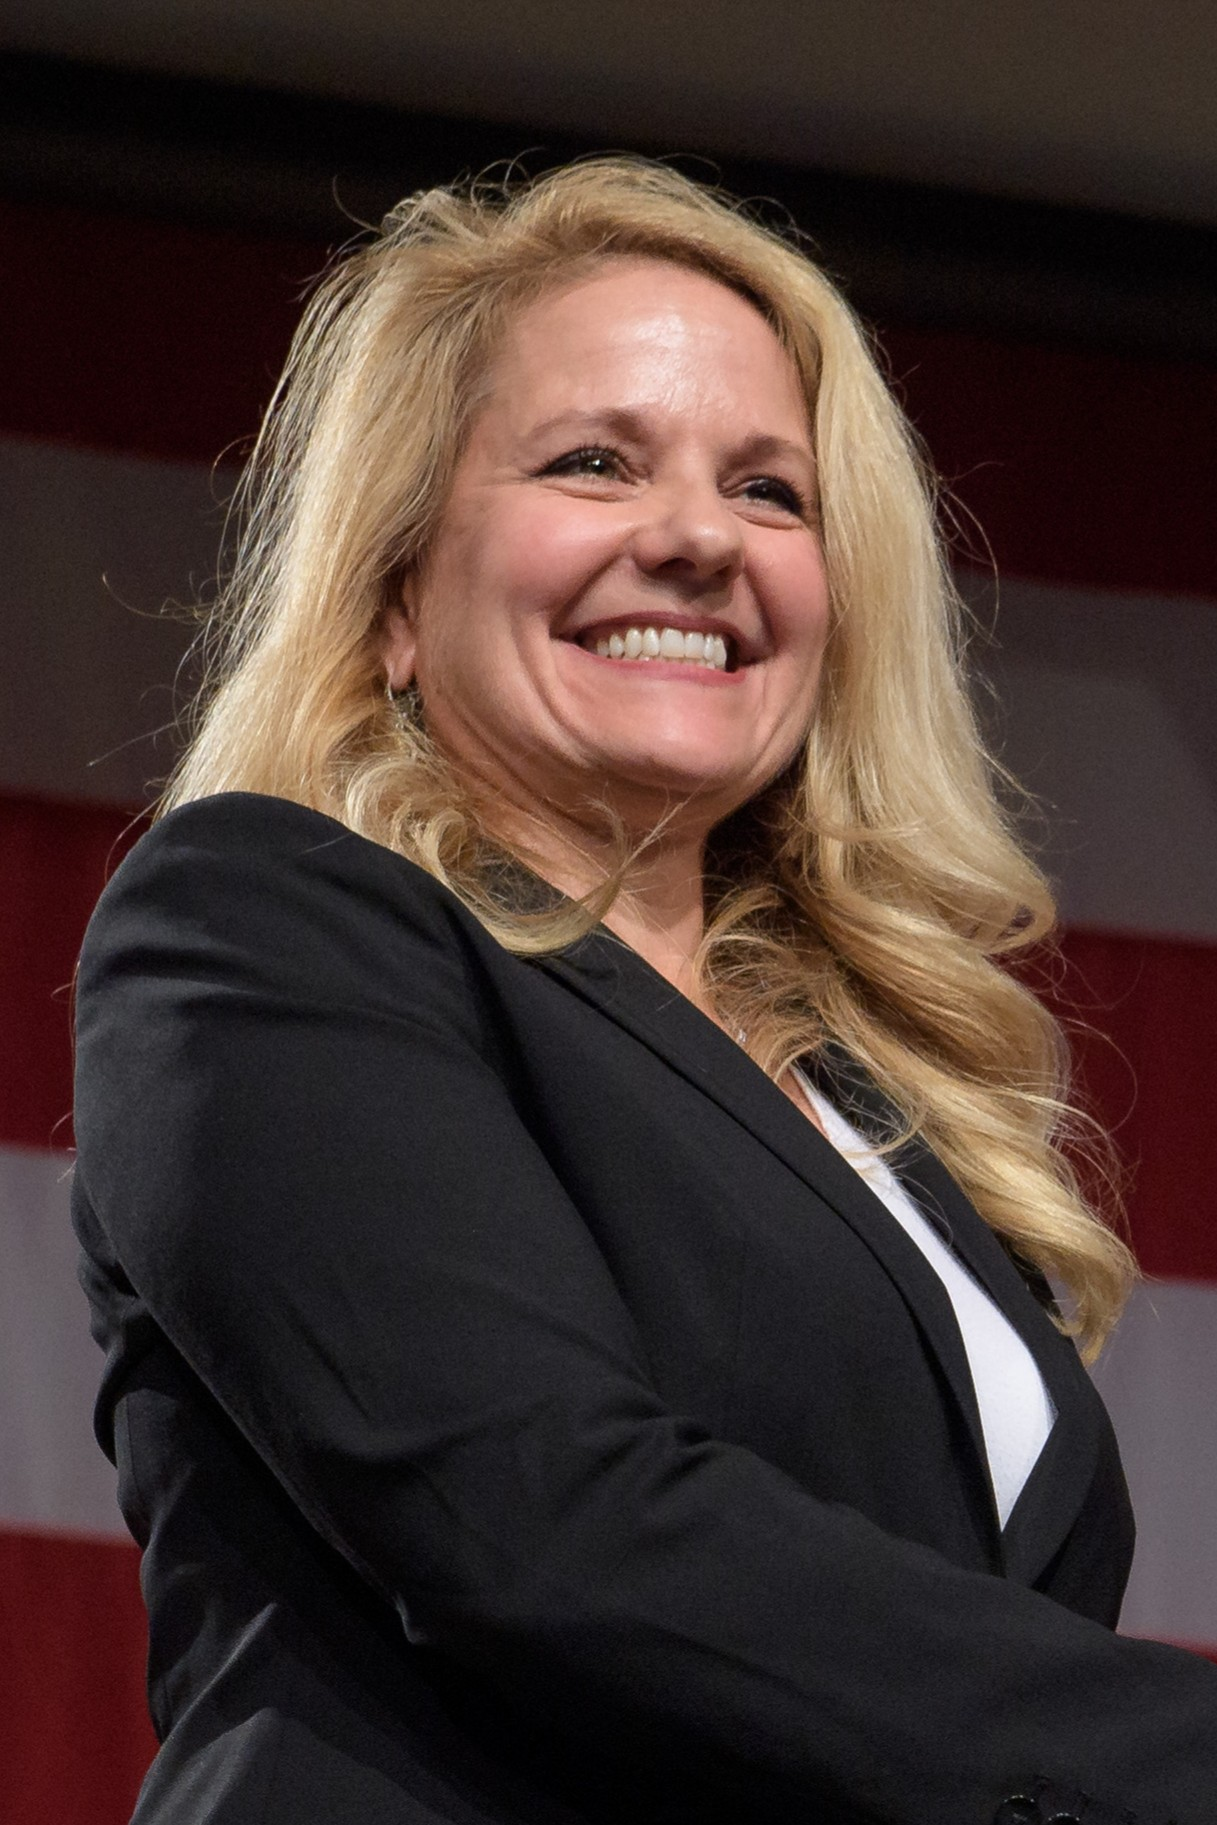 Shotwell (pictured above) has contributed to projects like the Falcon Vehicle Family Manifest at SpaceX